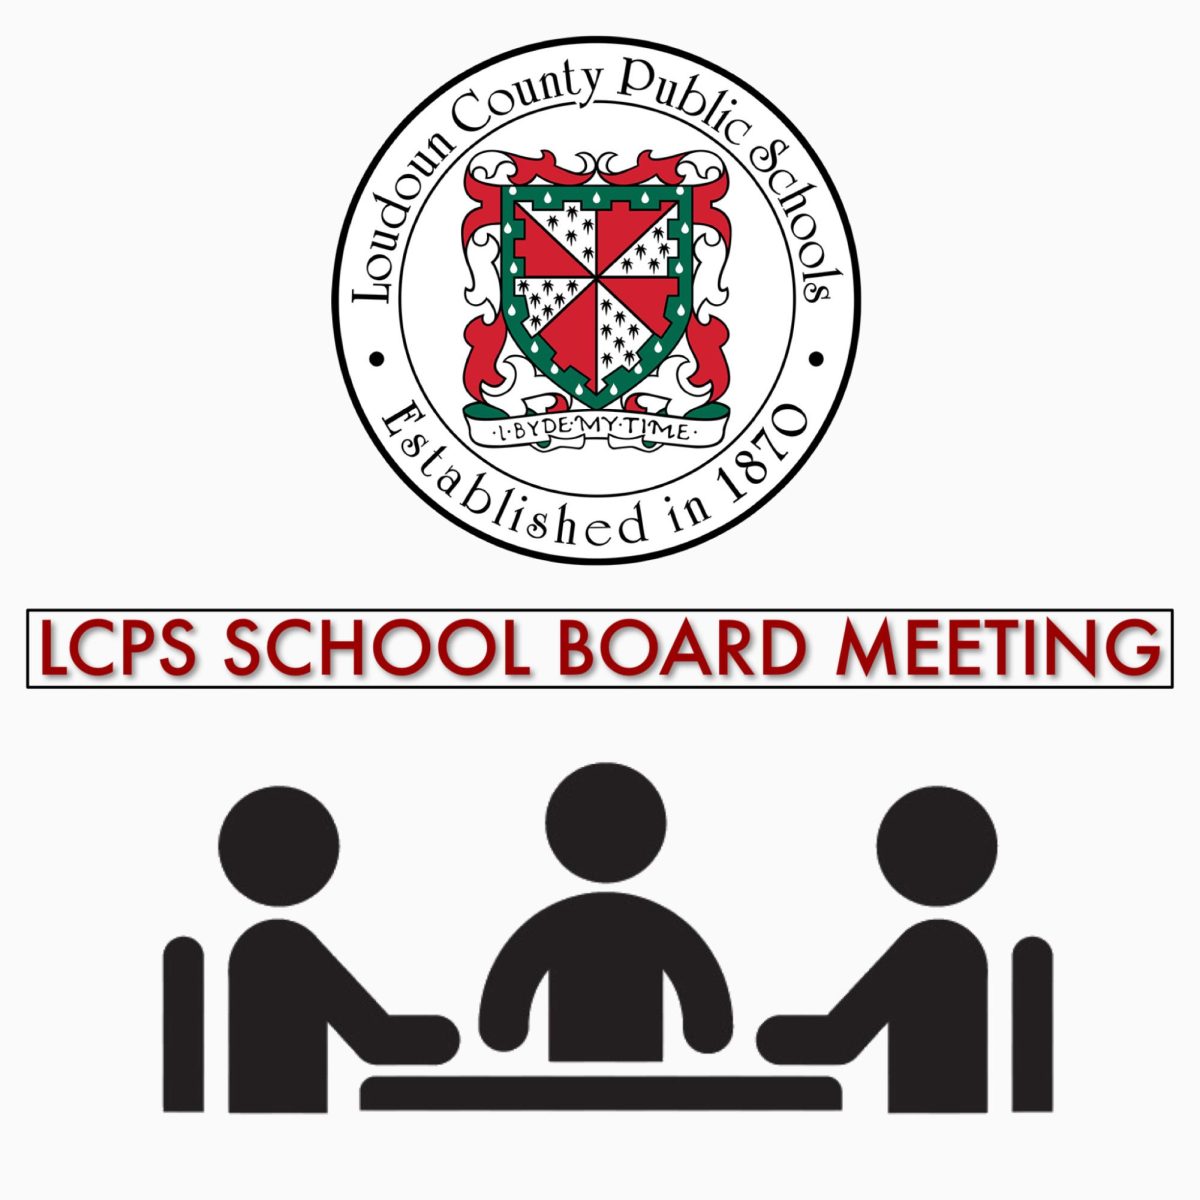 During the Oct. 24 school board meeting, members discussed budget and legislative changes for the upcoming school year, clarified uncertainties about bus misconduct and security, and made several revisions to previous policies.